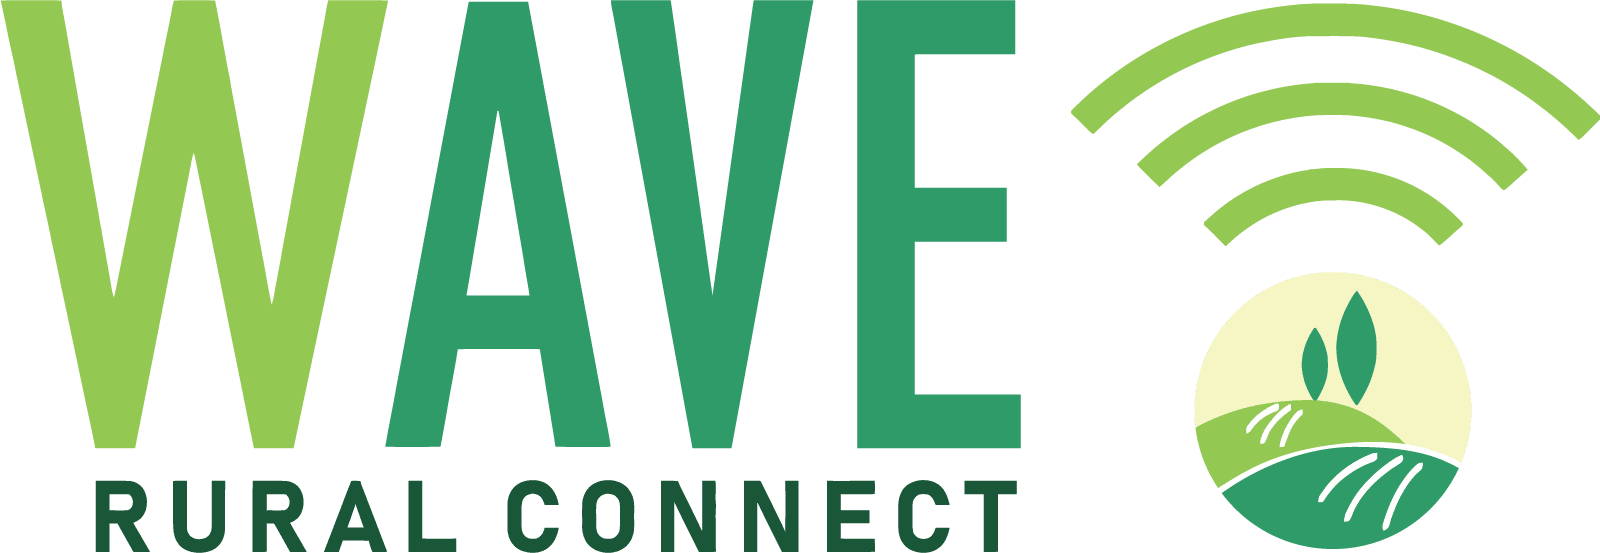 Wave Rural Connect